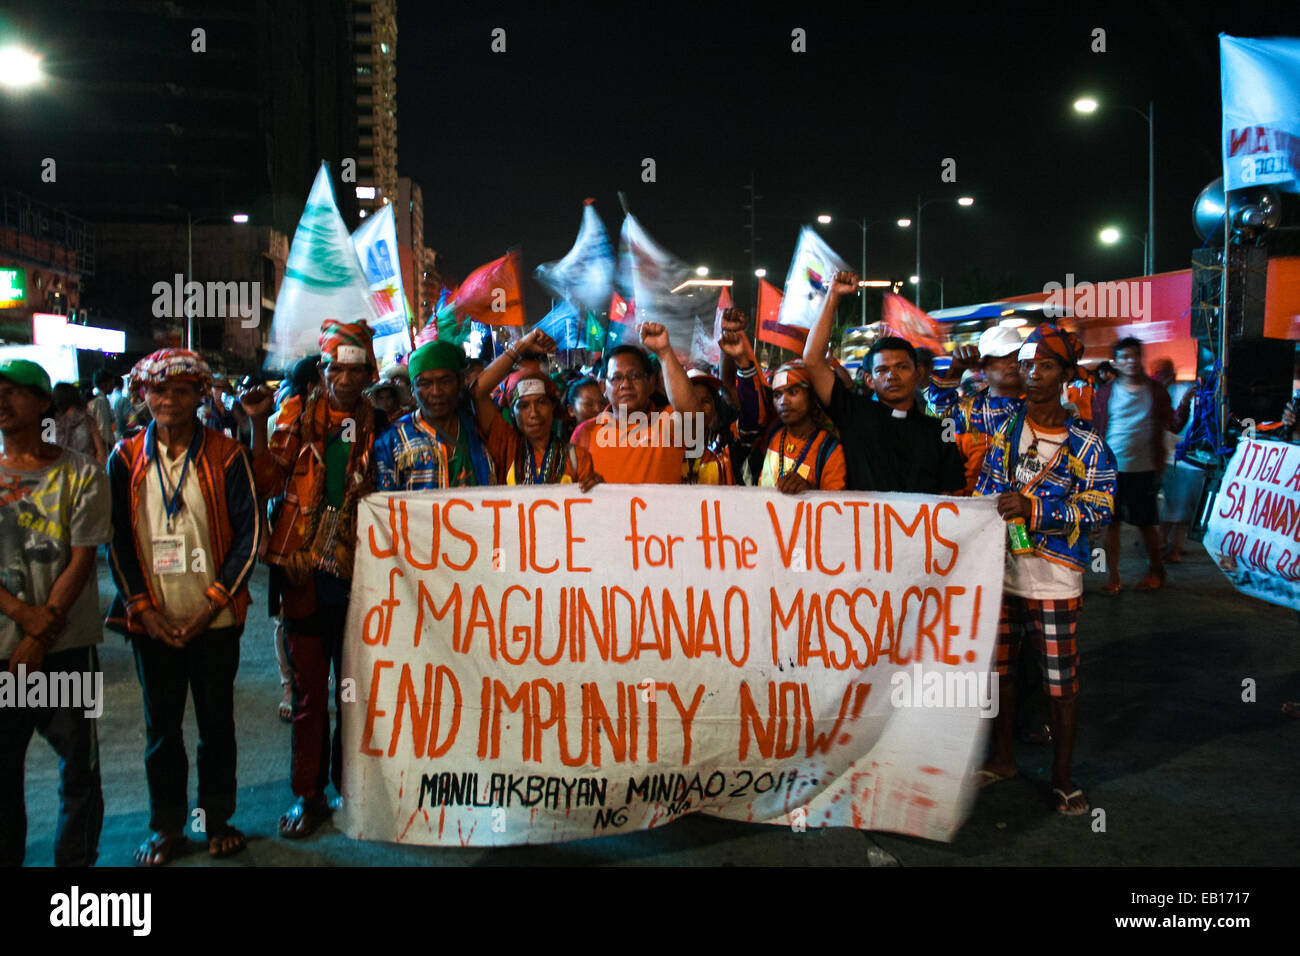 Lakbayan delegates from Mindanao marches towards the Redemptorist church in Baclaran, Paranaque. Hundreds of delegates from Mindanao, together with protest groups from southern Luzon held a candle lighting event in commemoration of the 5th anniversary of the Maguindanao massacre, where 58 people was murdered. 32 of the victims were journalists. © J Gerard Seguia/Pacific Press/Alamy Live News Stock Photo